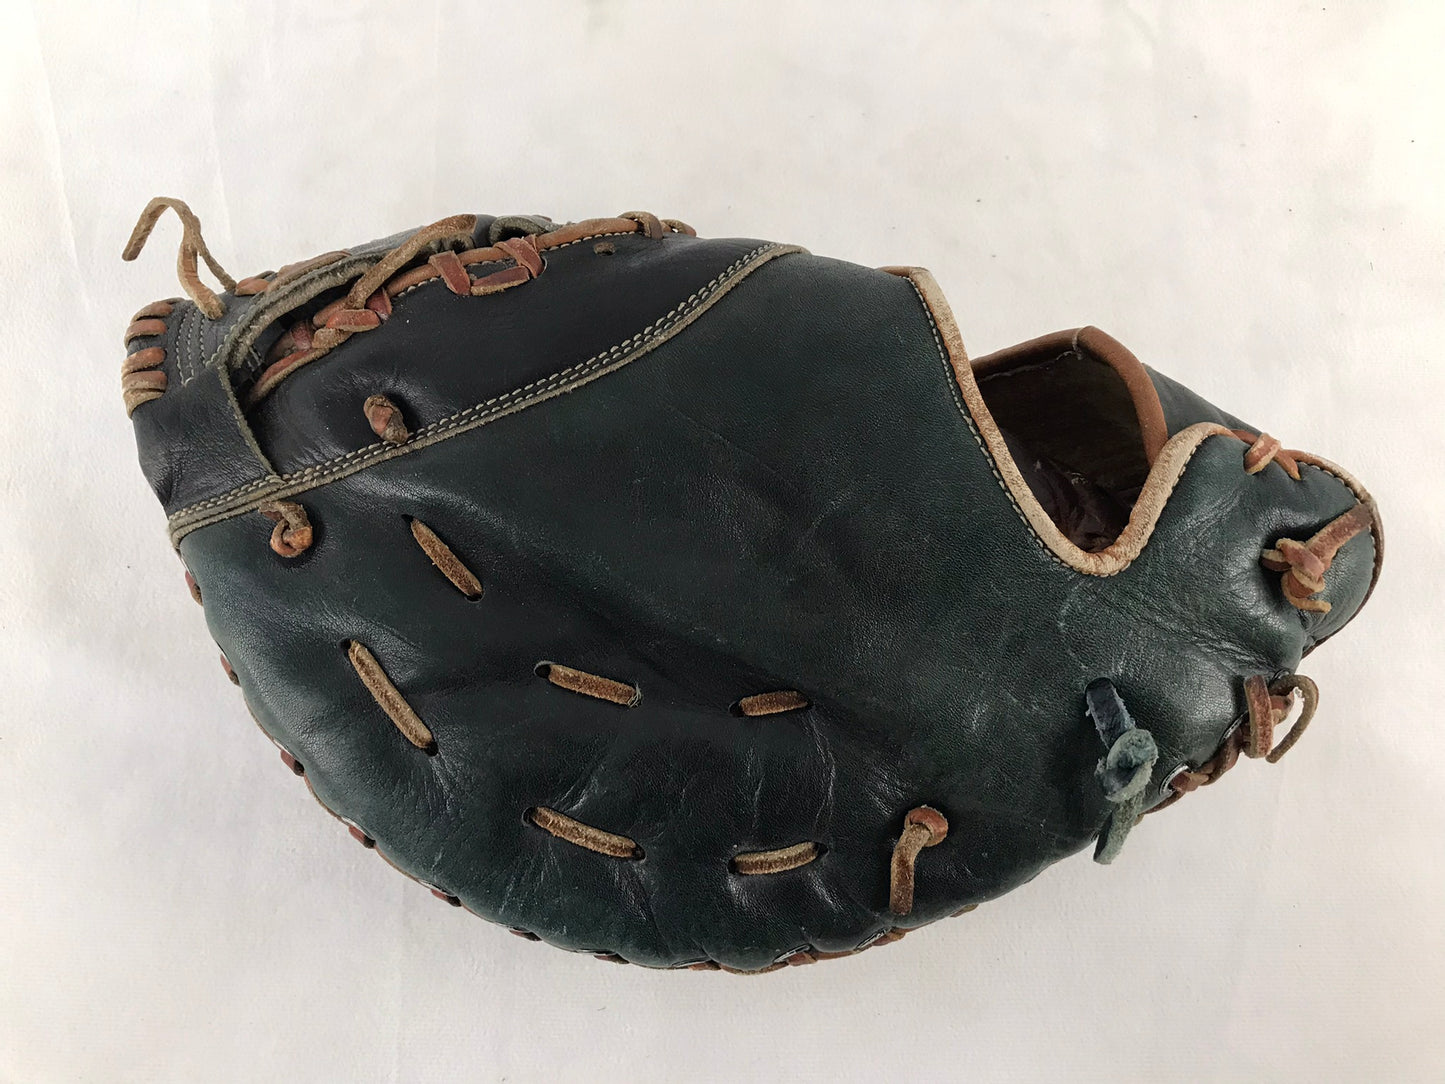 Baseball Glove Adult Size 12 inch First Basemen Cooper Black Diamond Vintage Green Leather Very RARE Outstanding Quality